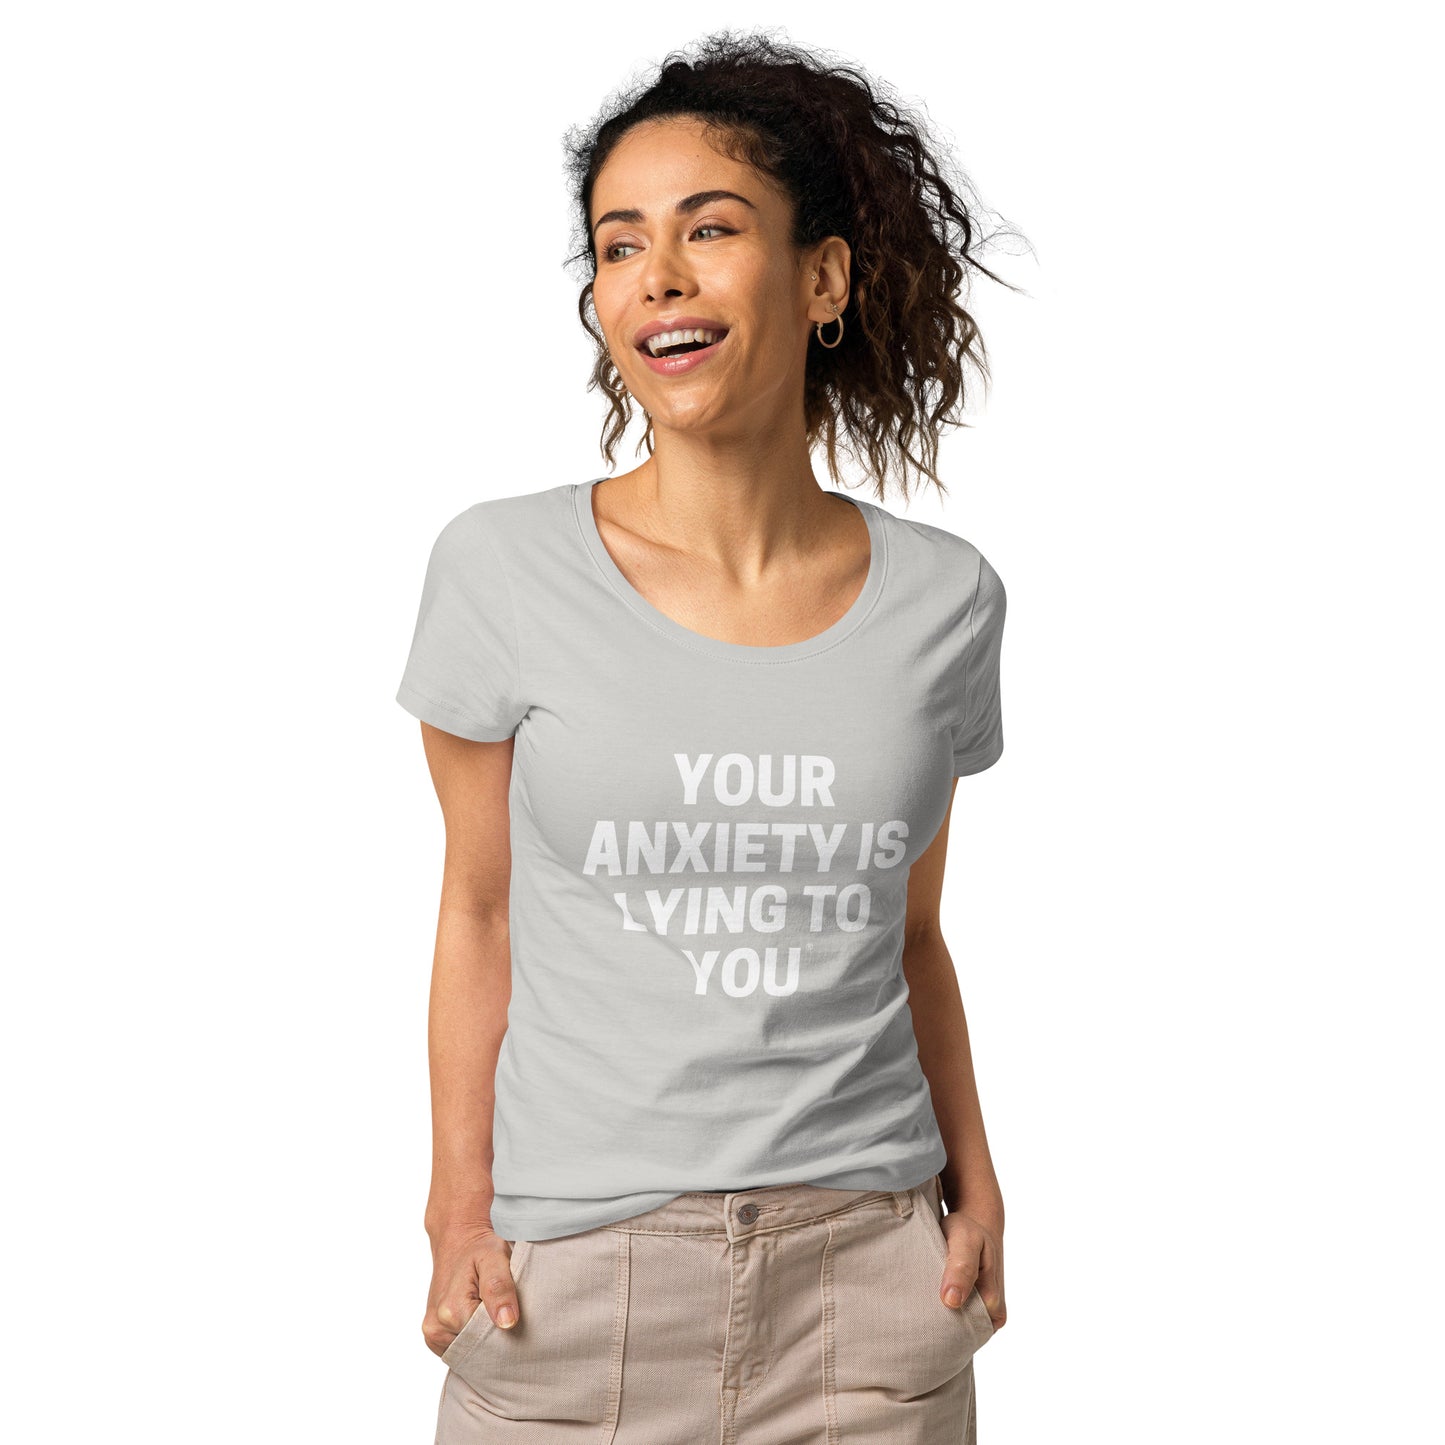 Your Anxiety is lying to you- Women’s basic organic t-shirt